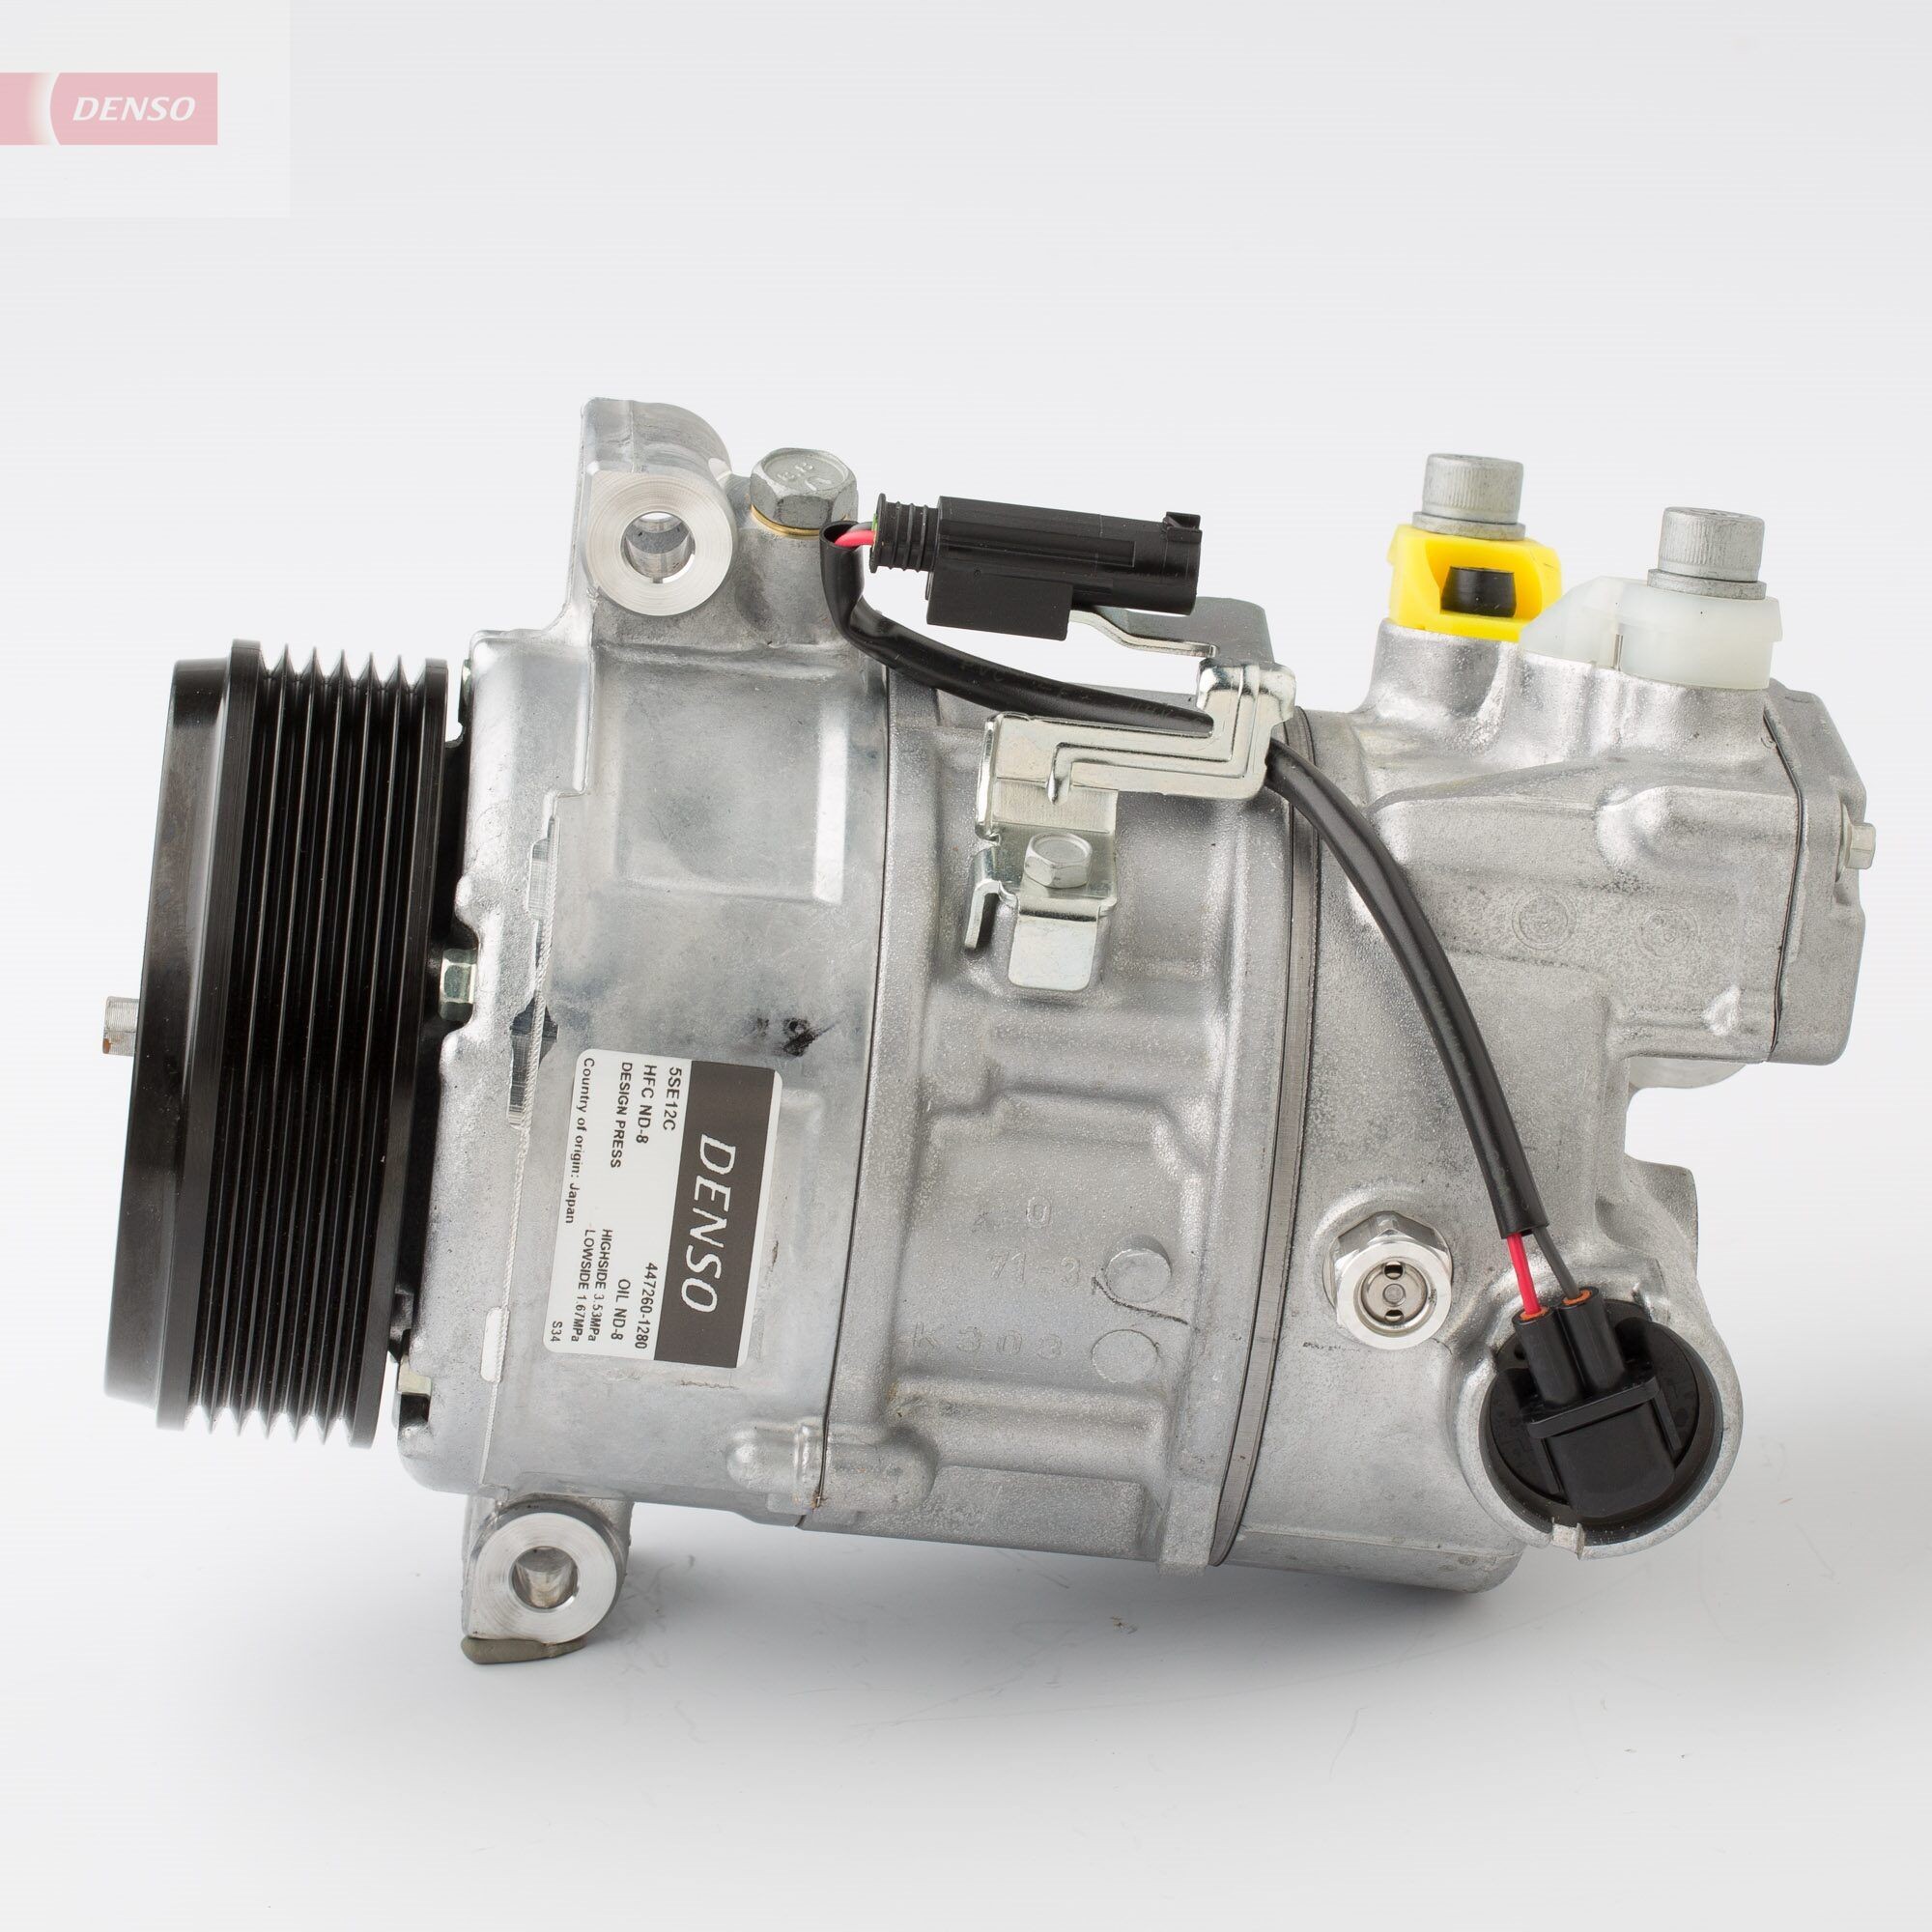 Air conditioning compressor DCP05026 from DENSO